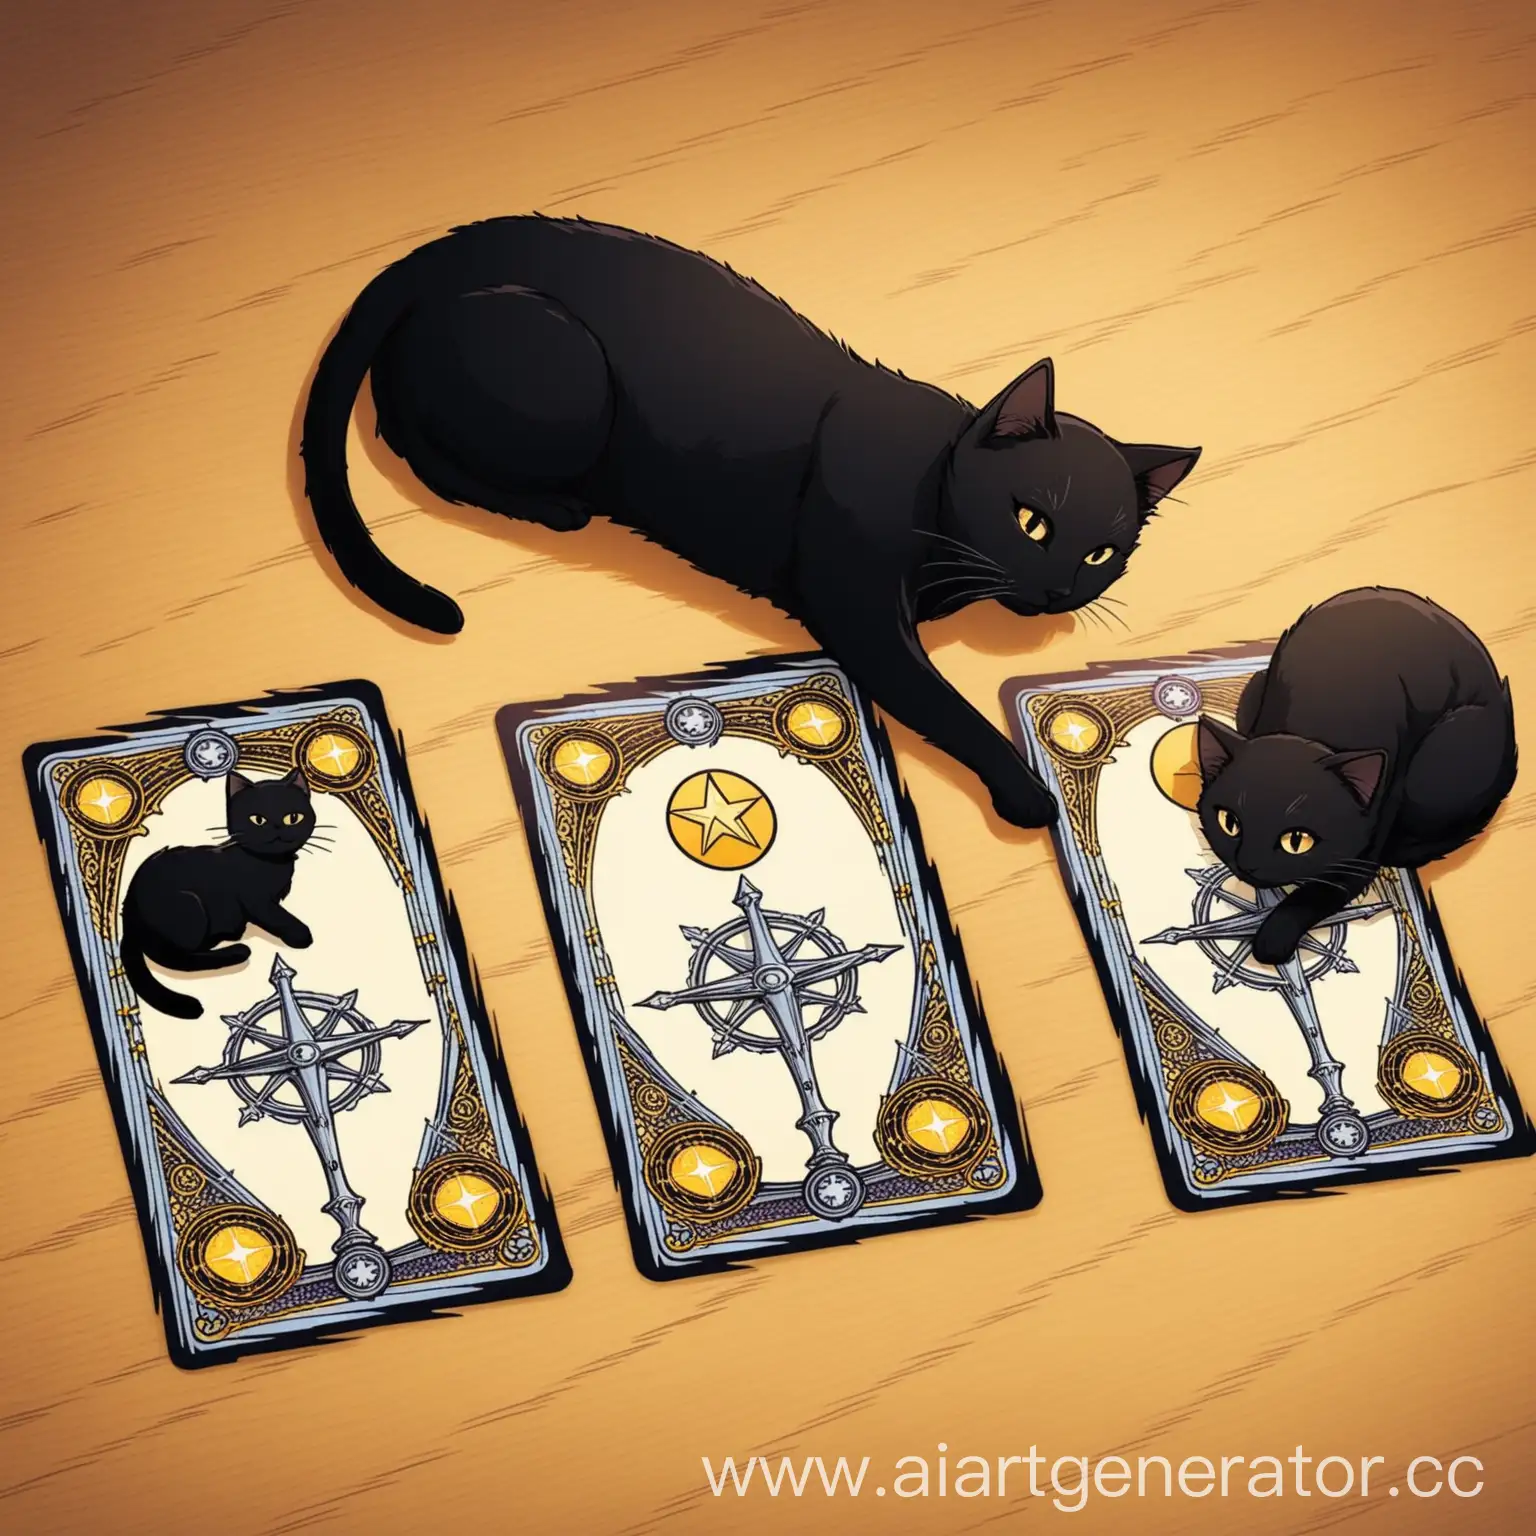 Three-Tarot-Cards-Surrounded-by-Black-Cats